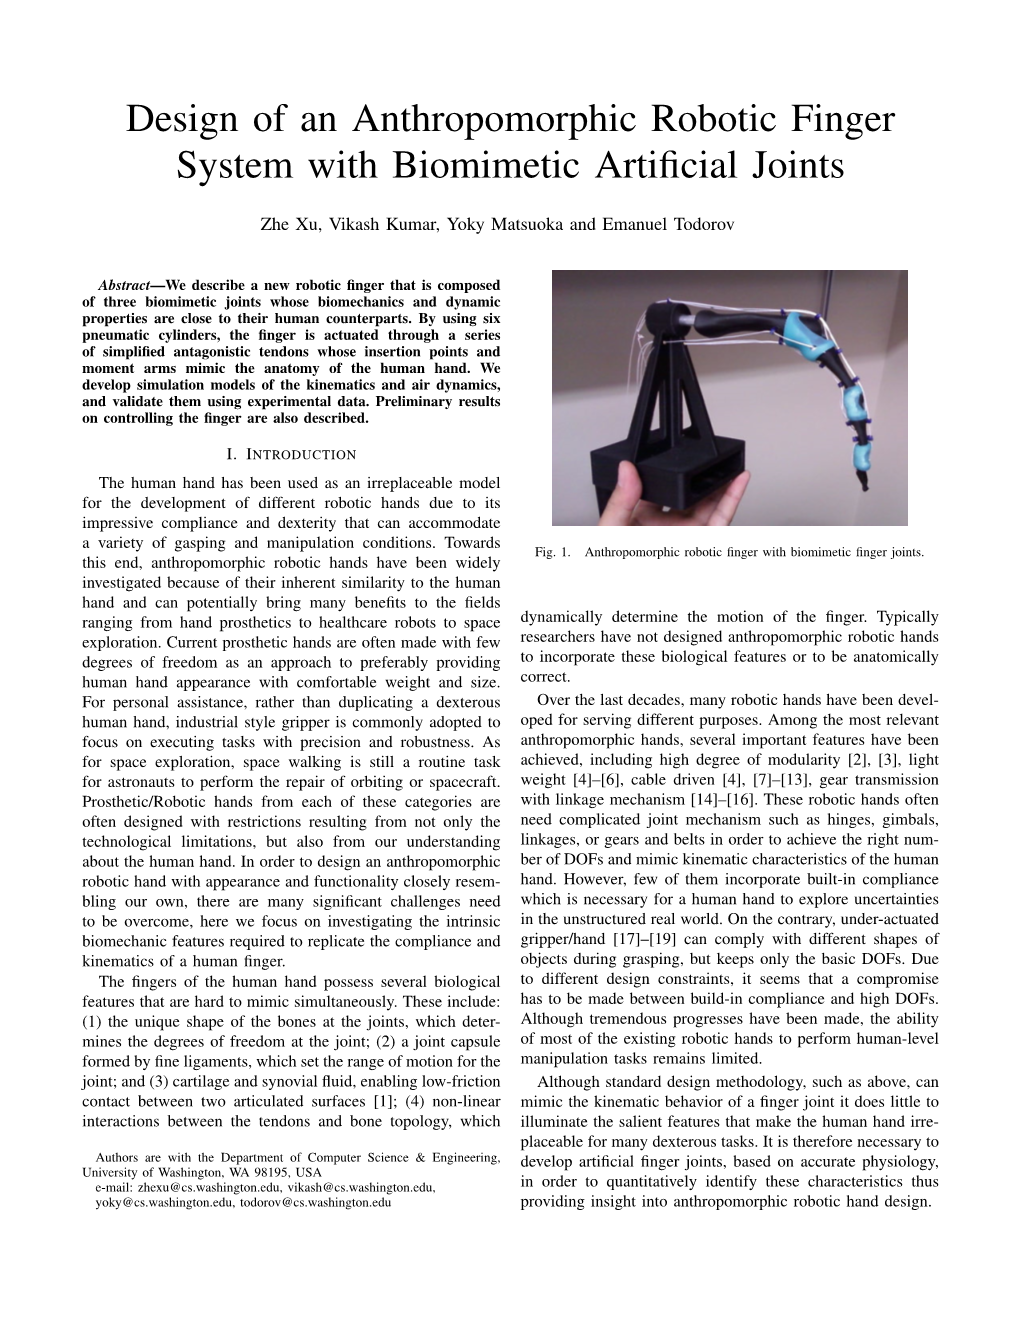 Design of an Anthropomorphic Robotic Finger System with Biomimetic Artiﬁcial Joints